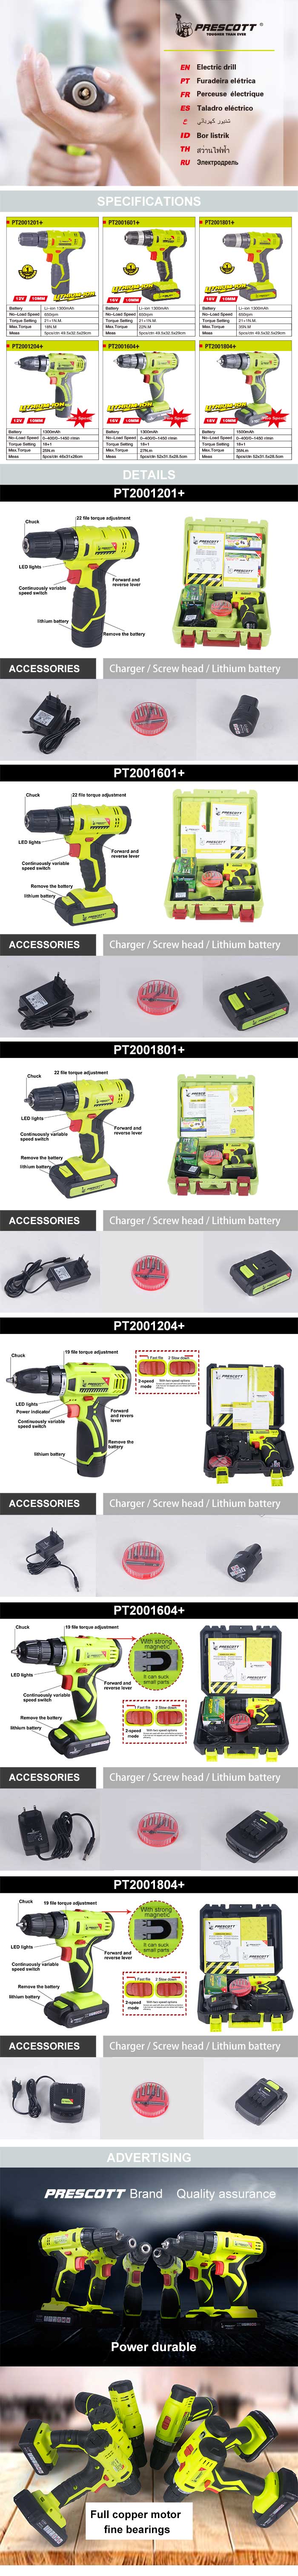 Cordless Drill PT2001804+ Specification